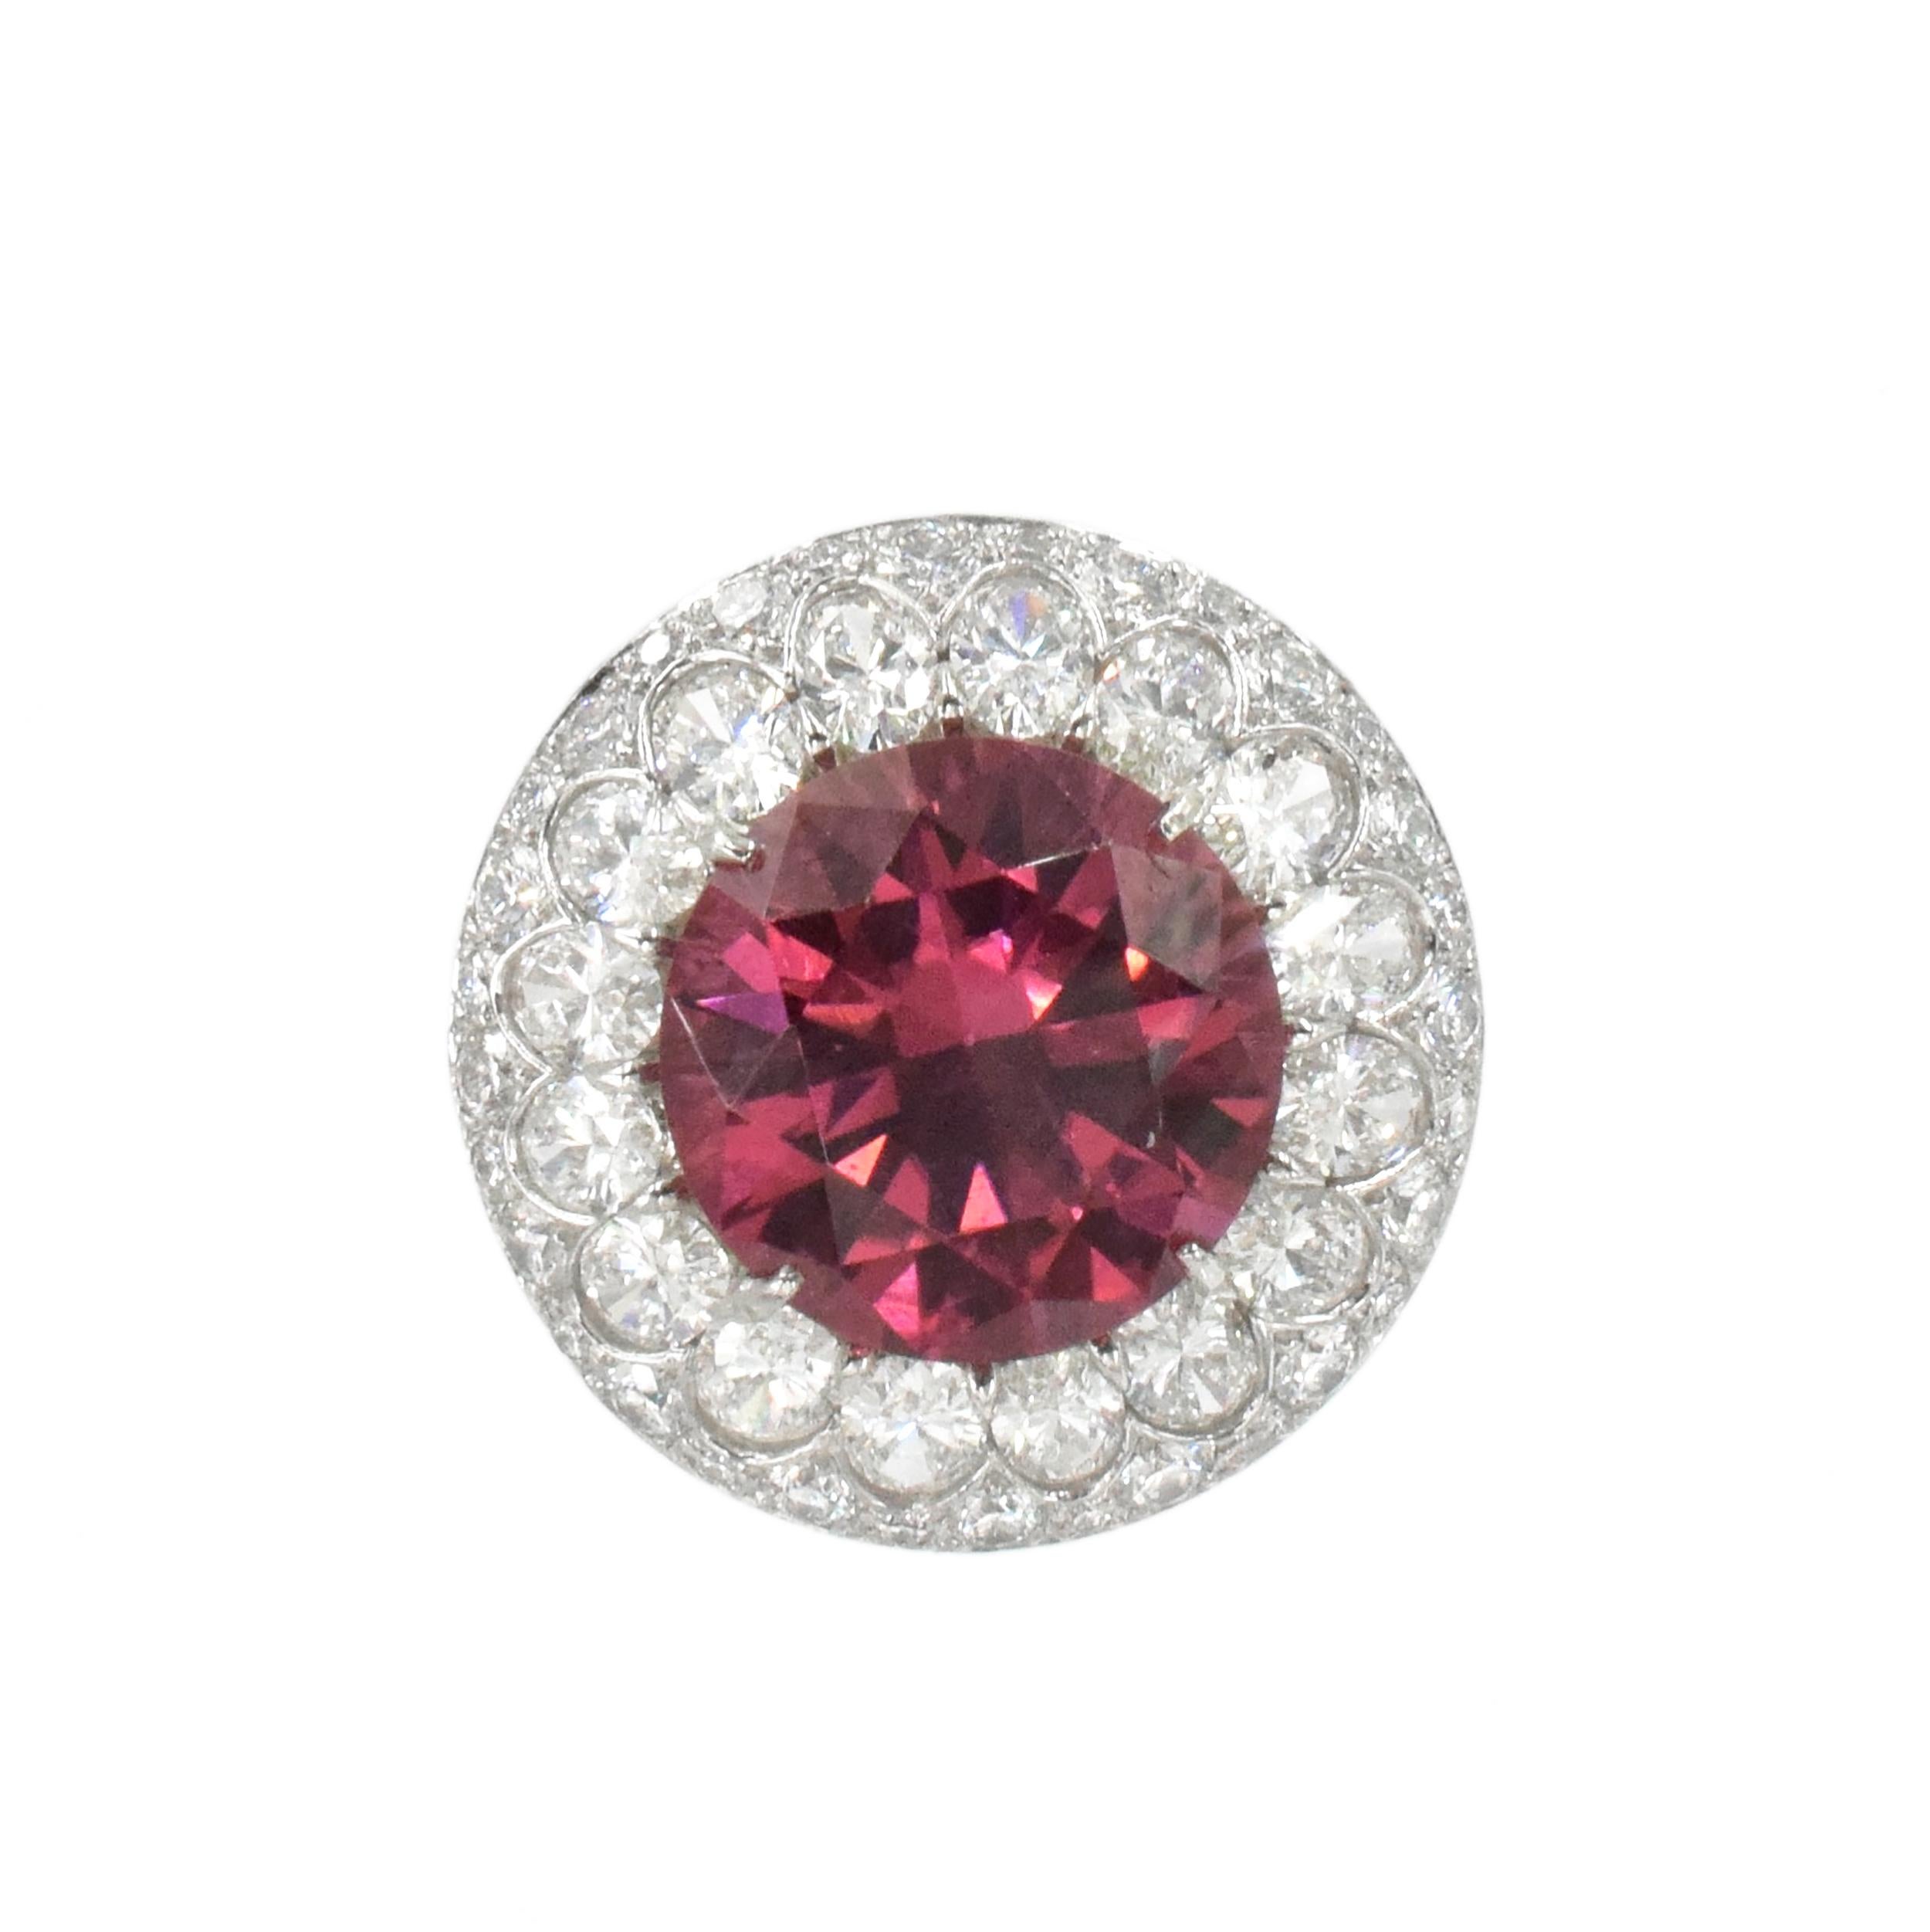 Pink tourmaline and diamond ring in platinum. Center of this ring is set with round brilliant cut pink tourmaline with total weight of approximately 8 carats (very rich color.) Surrounded by double halo of 16 oval cut diamonds and round diamonds on